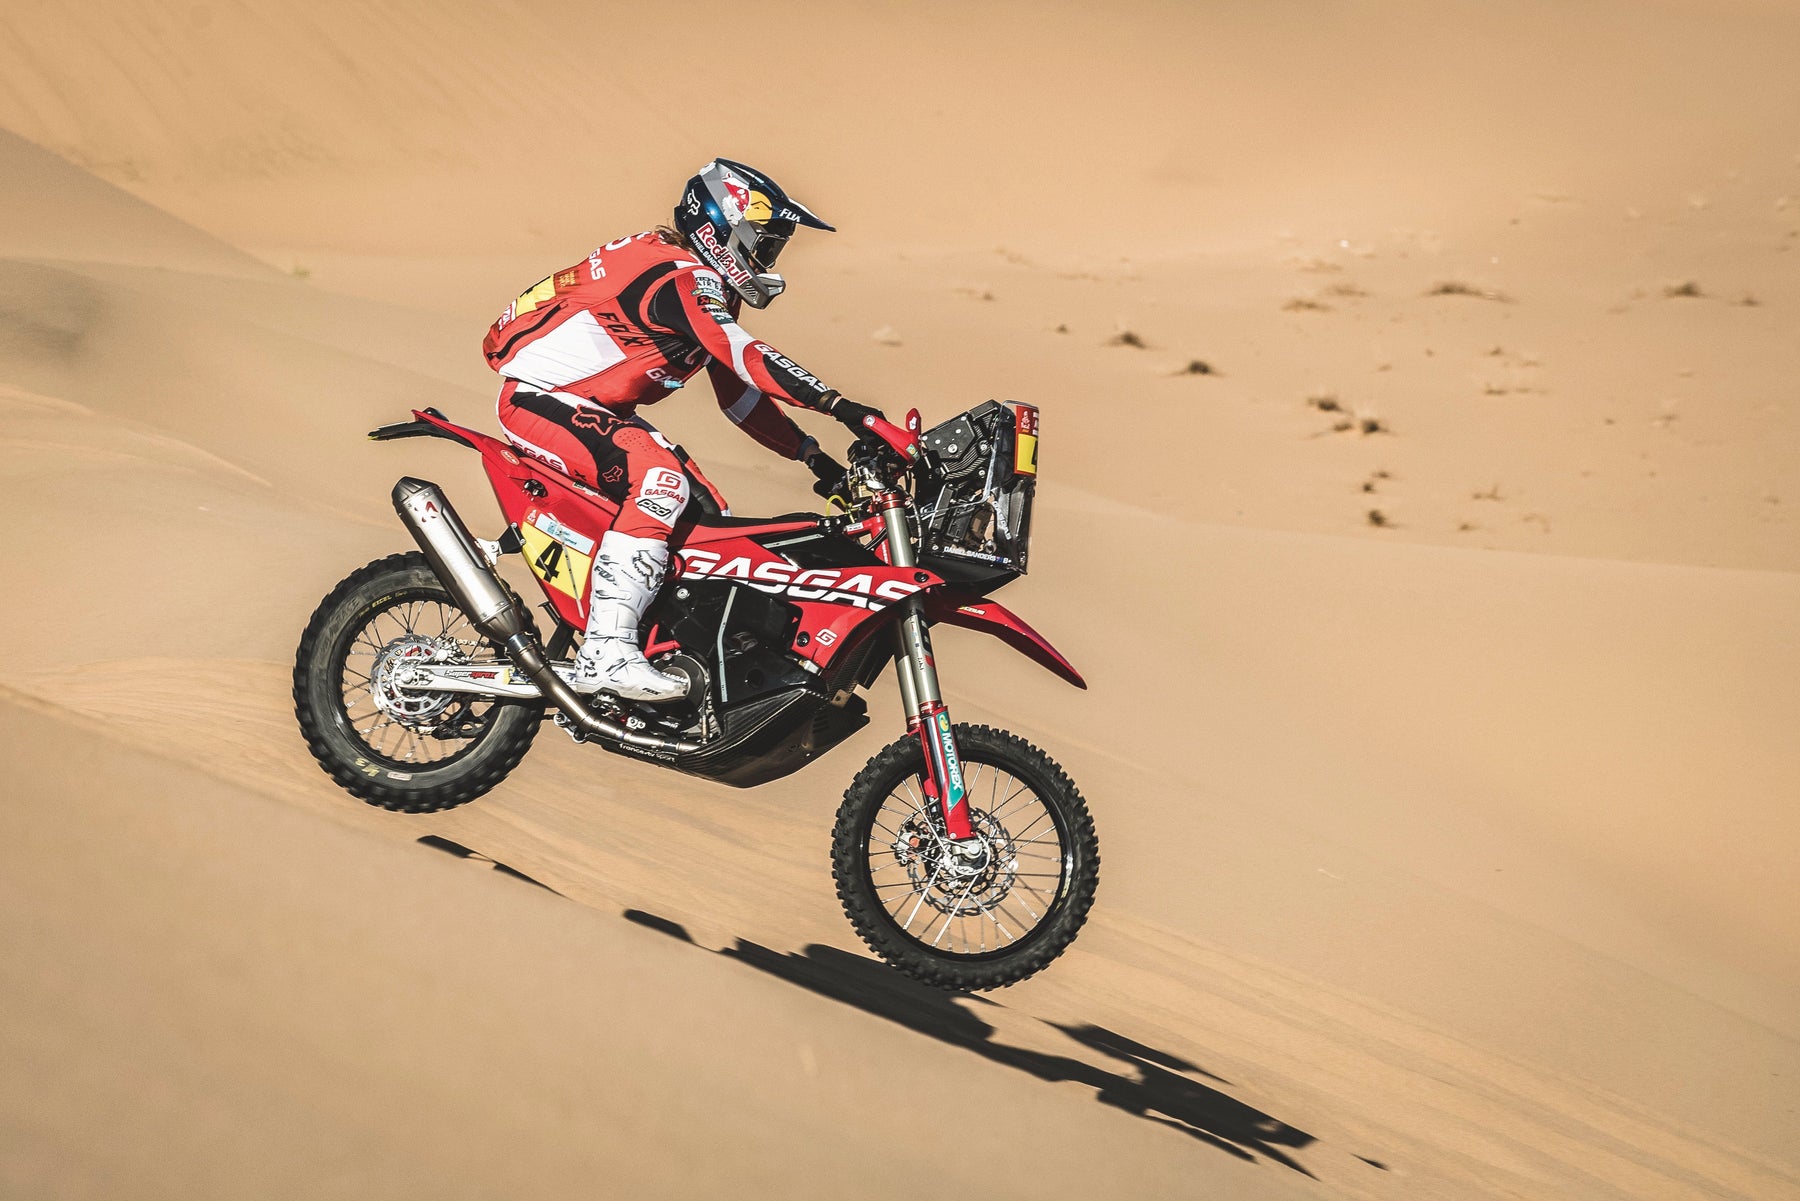 ALPINESTARS AT THE VERY TOP IN STAGE ONE AT 2022 DAKAR, PODIUM LOCK-OUT IN TECH-AIR®